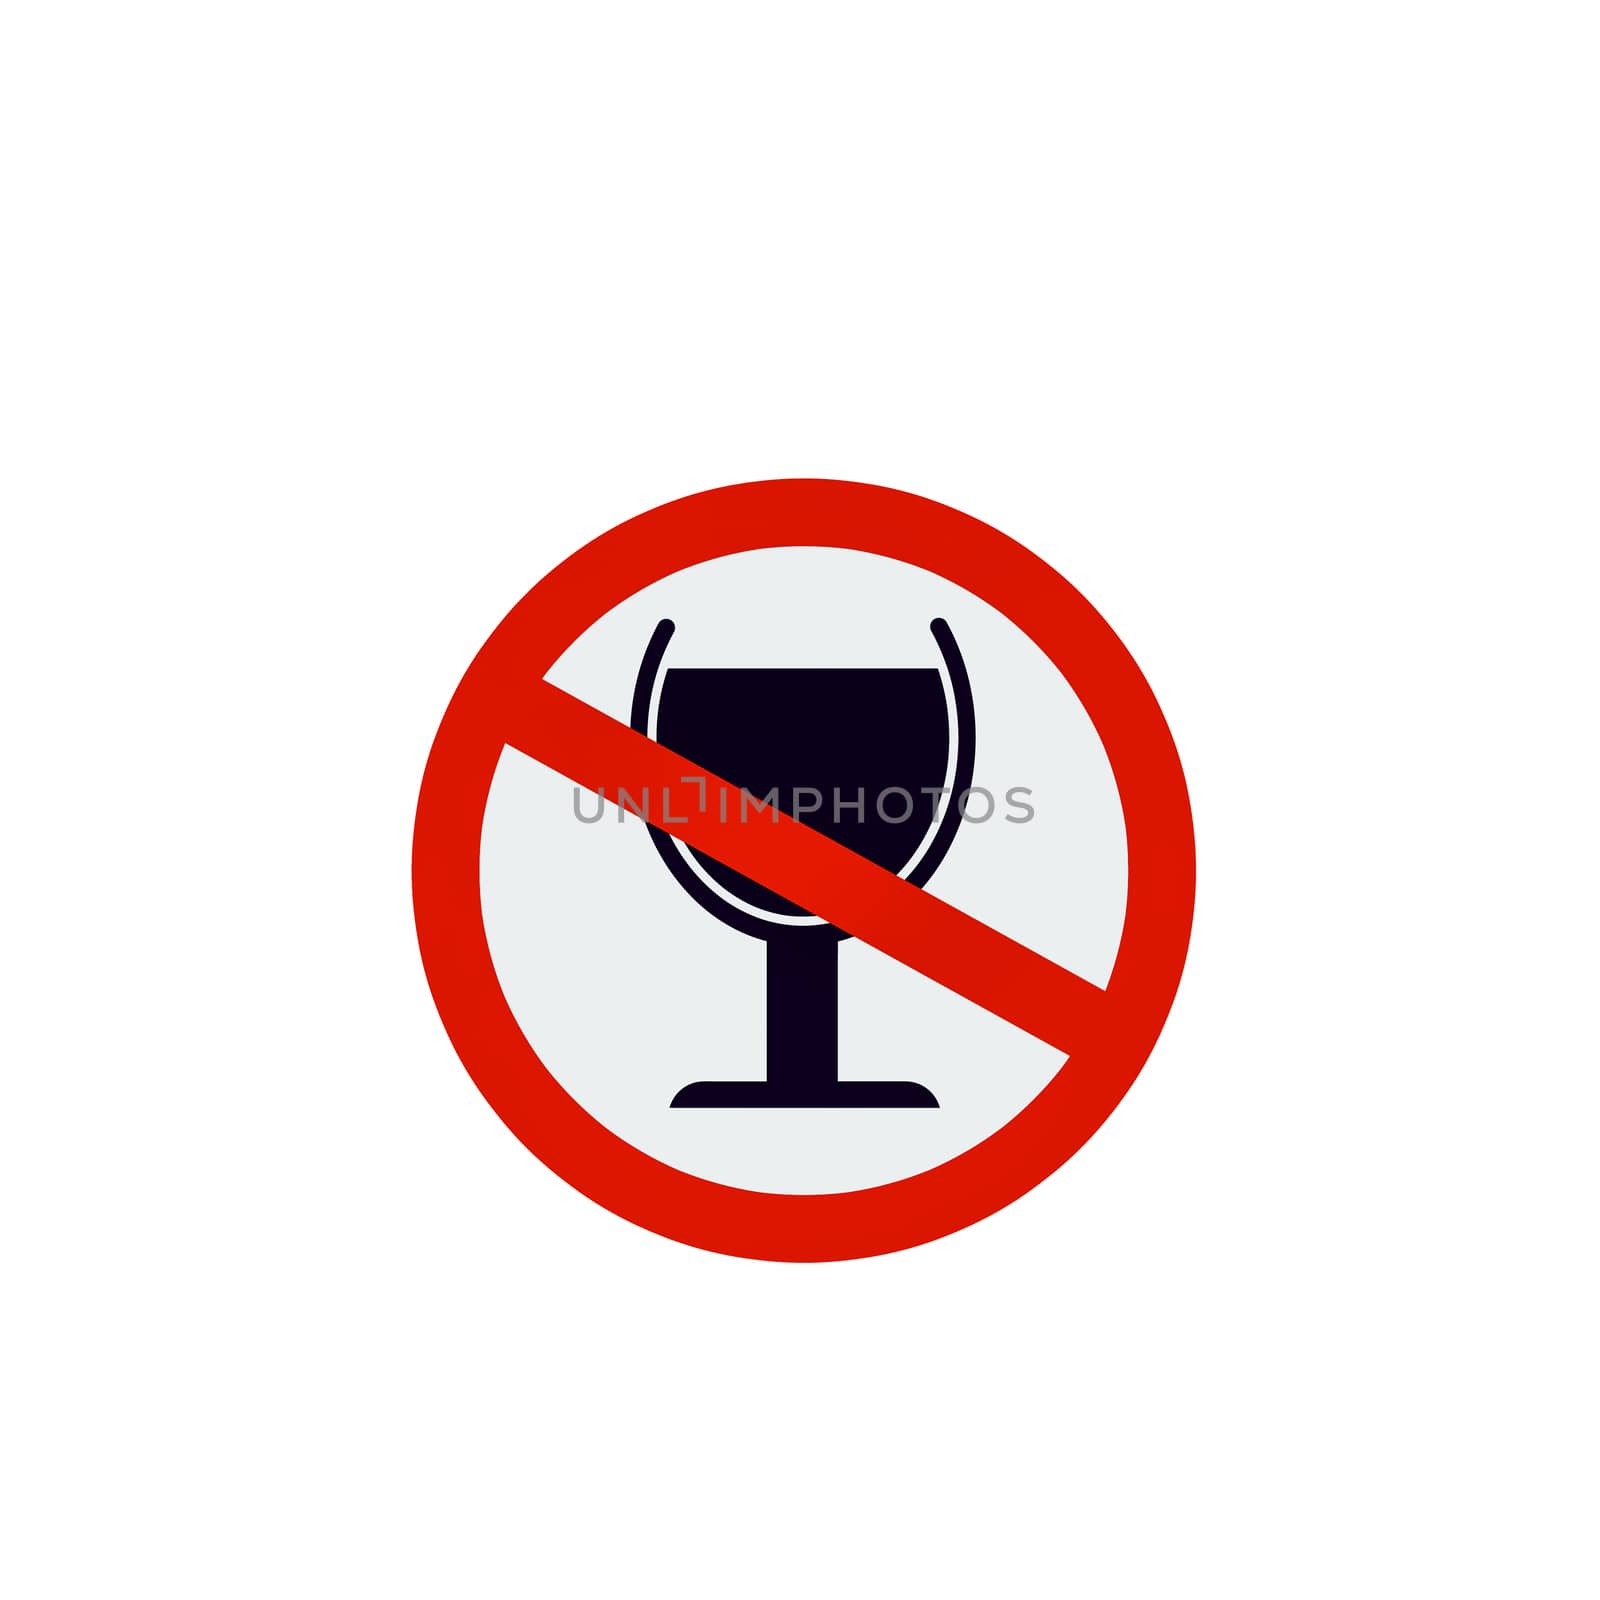 No alcohol drinks icon on white background.Prohibits, Drunk not to drive.